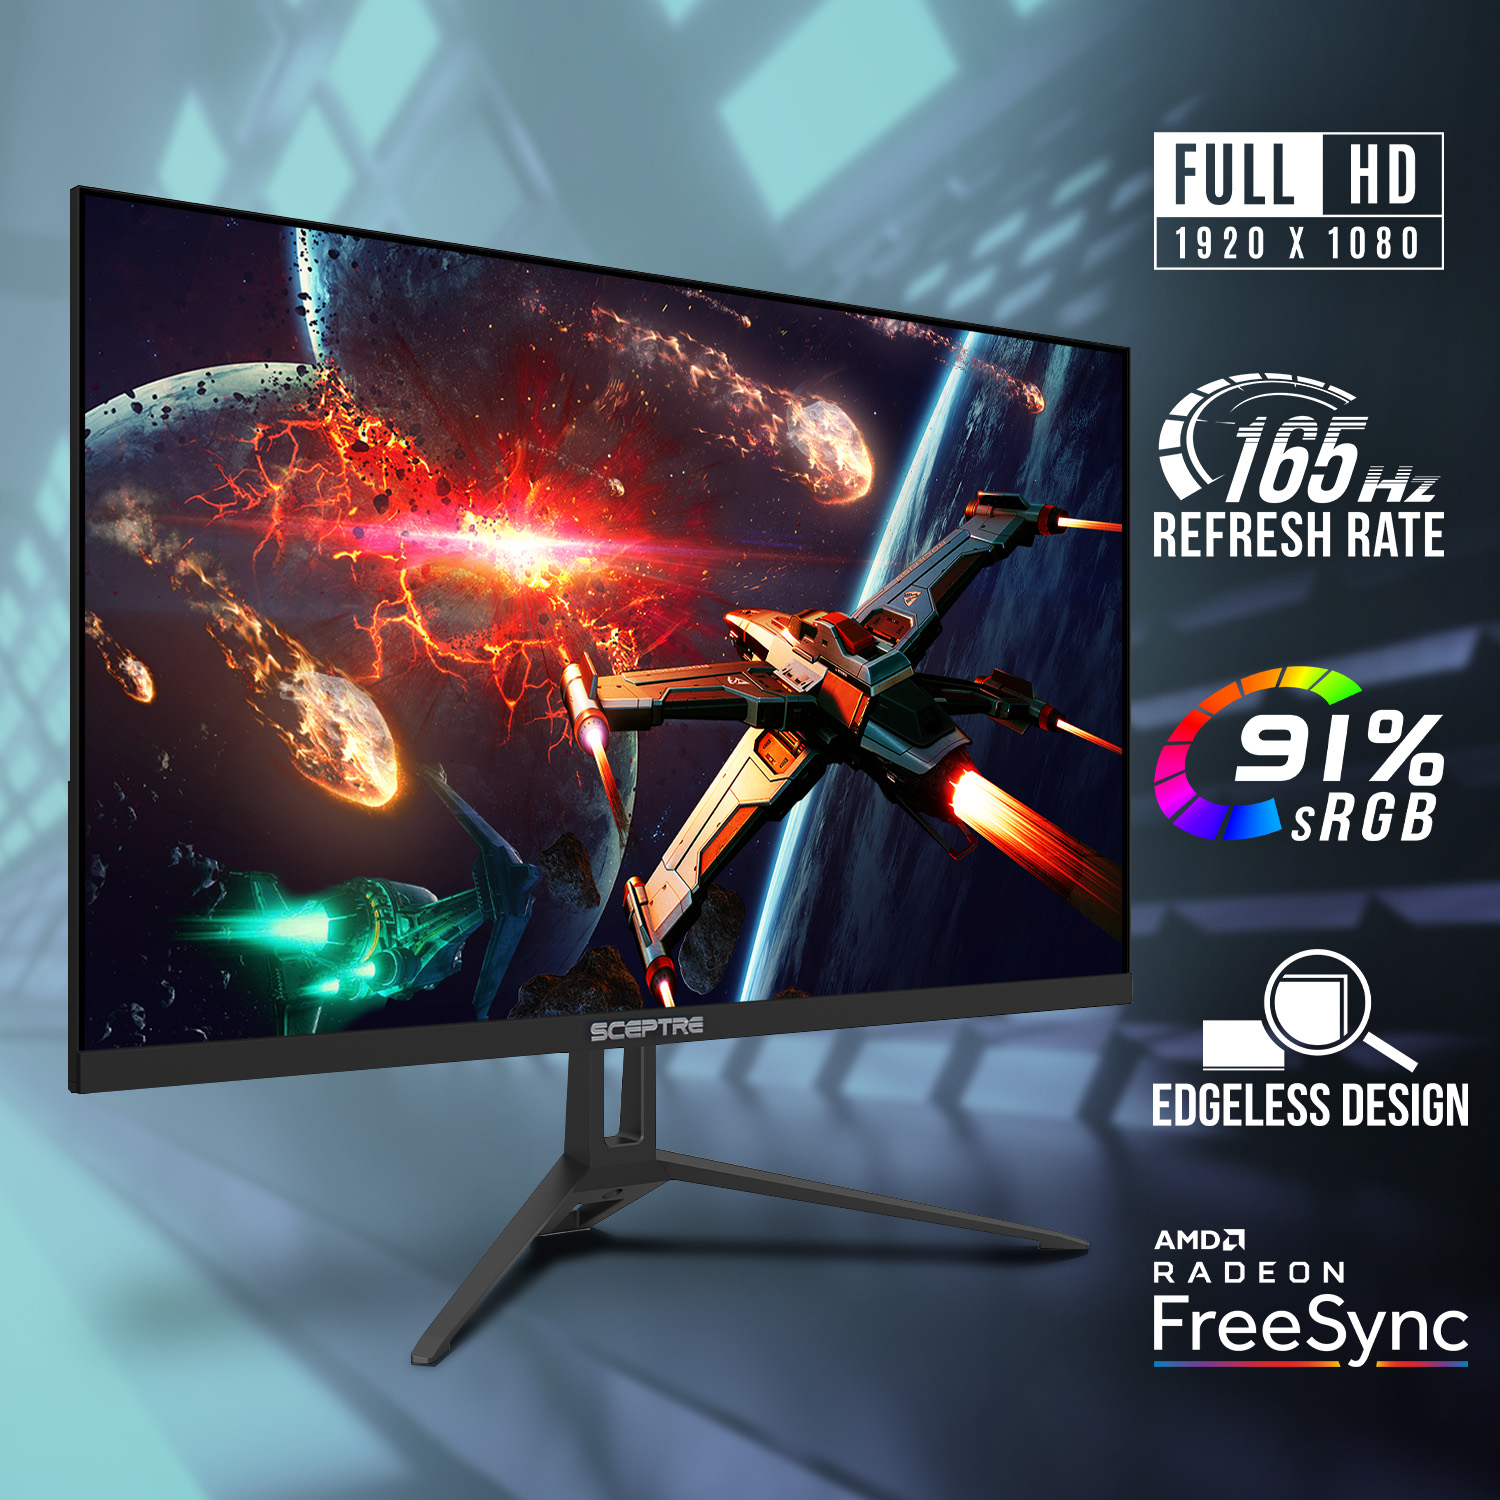 24" Gaming Monitor 1080p up to 165Hz 91% sRGB AMD FreeSync, Build-in Speakers Machine Black 2022 (E248B-FWS168) - image 2 of 6